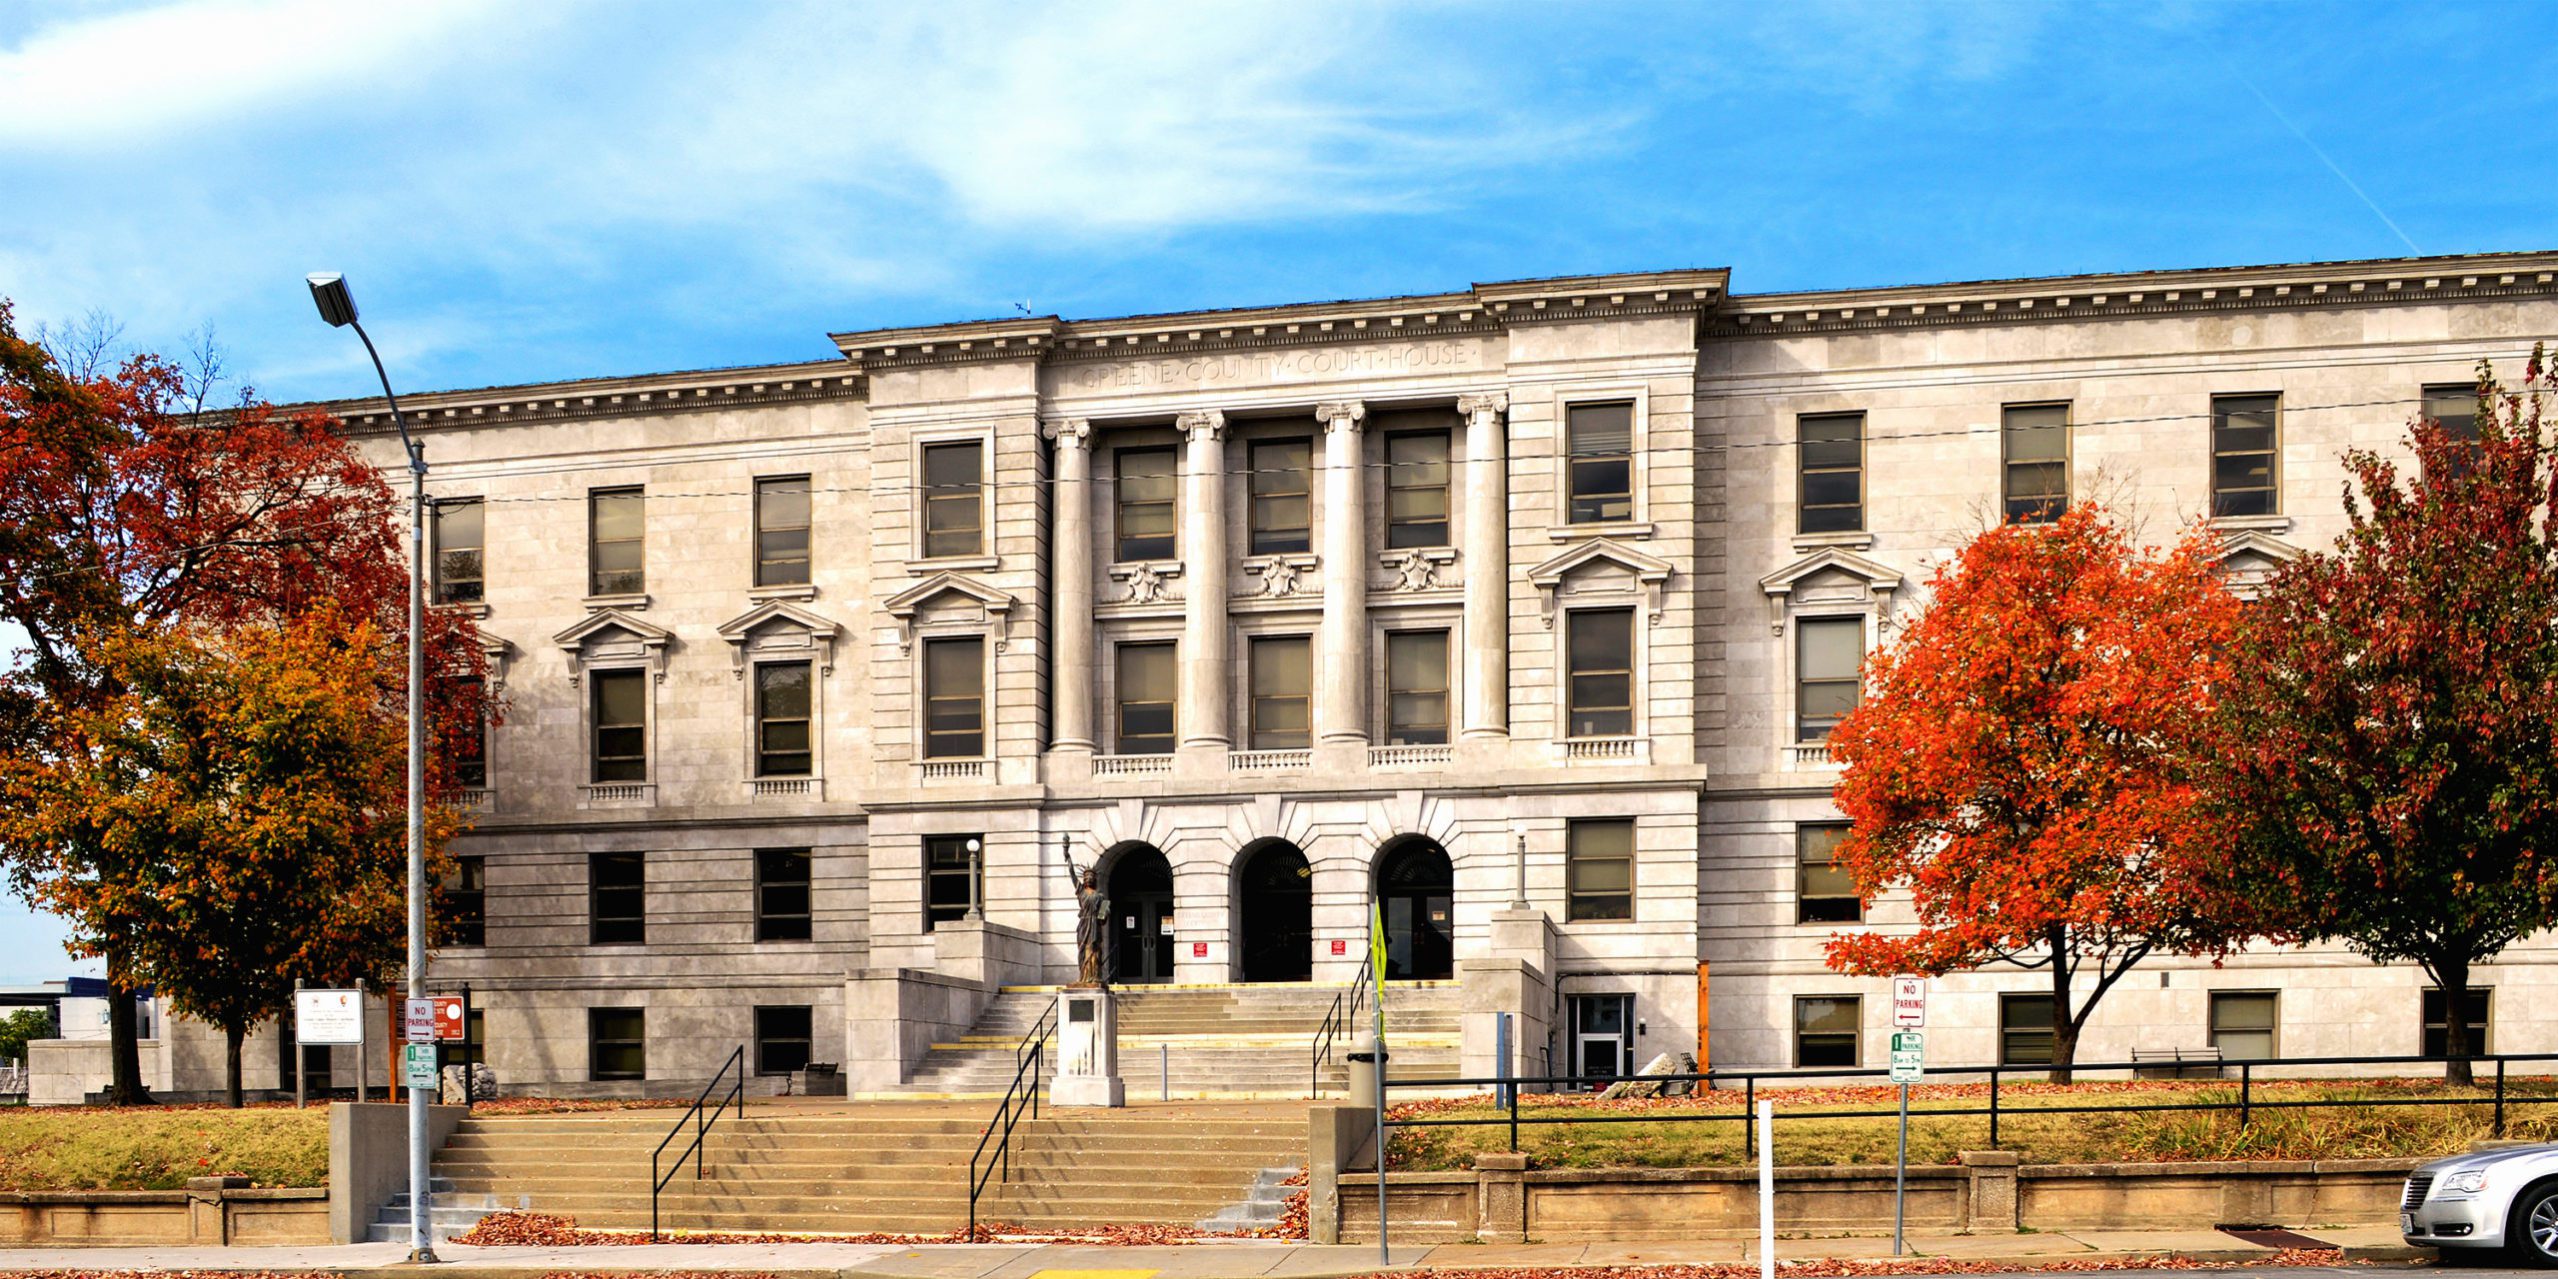 Greene County Courthouse in Springfield, MO, location of the 2022 Missouri Bar Annual Conference. Photo by Kbh3rd.